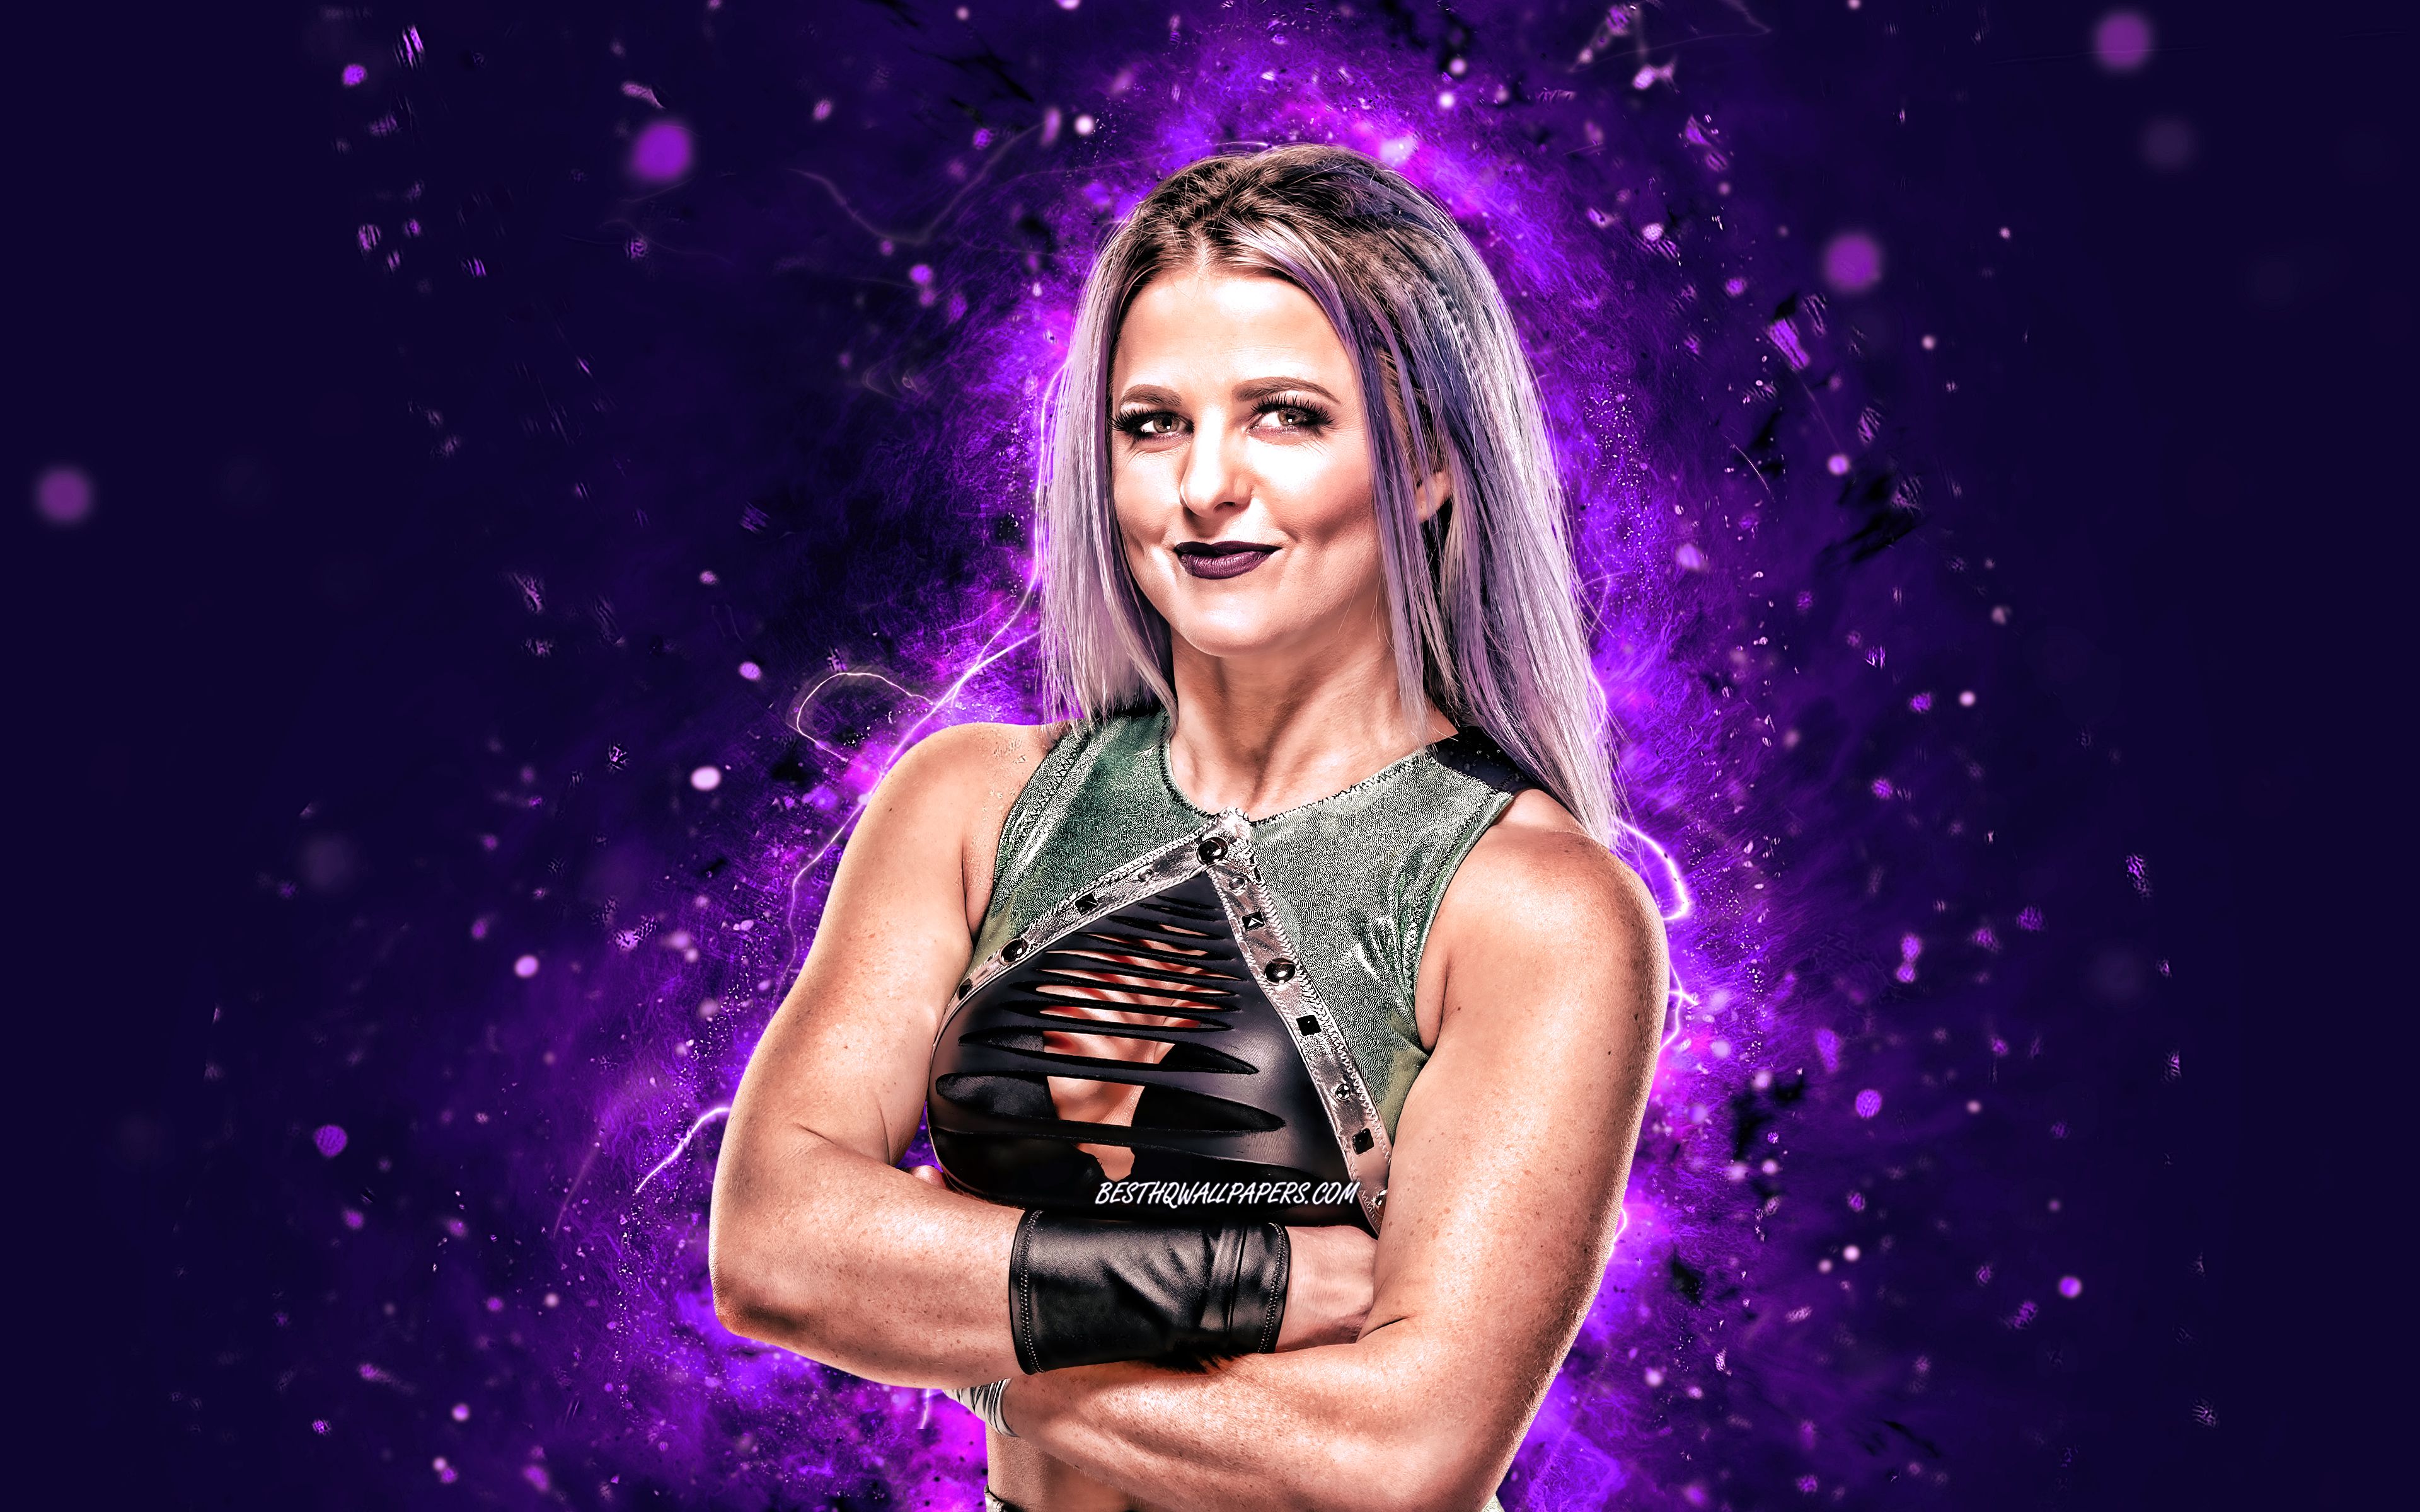 Download wallpaper Candice LeRae, 4k, american wrestlers, WWE, wrestling, violet neon lights, Candice Gargano, female wrestlers, Candice LeRae 4K, wrestlers for desktop with resolution 3840x2400. High Quality HD picture wallpaper